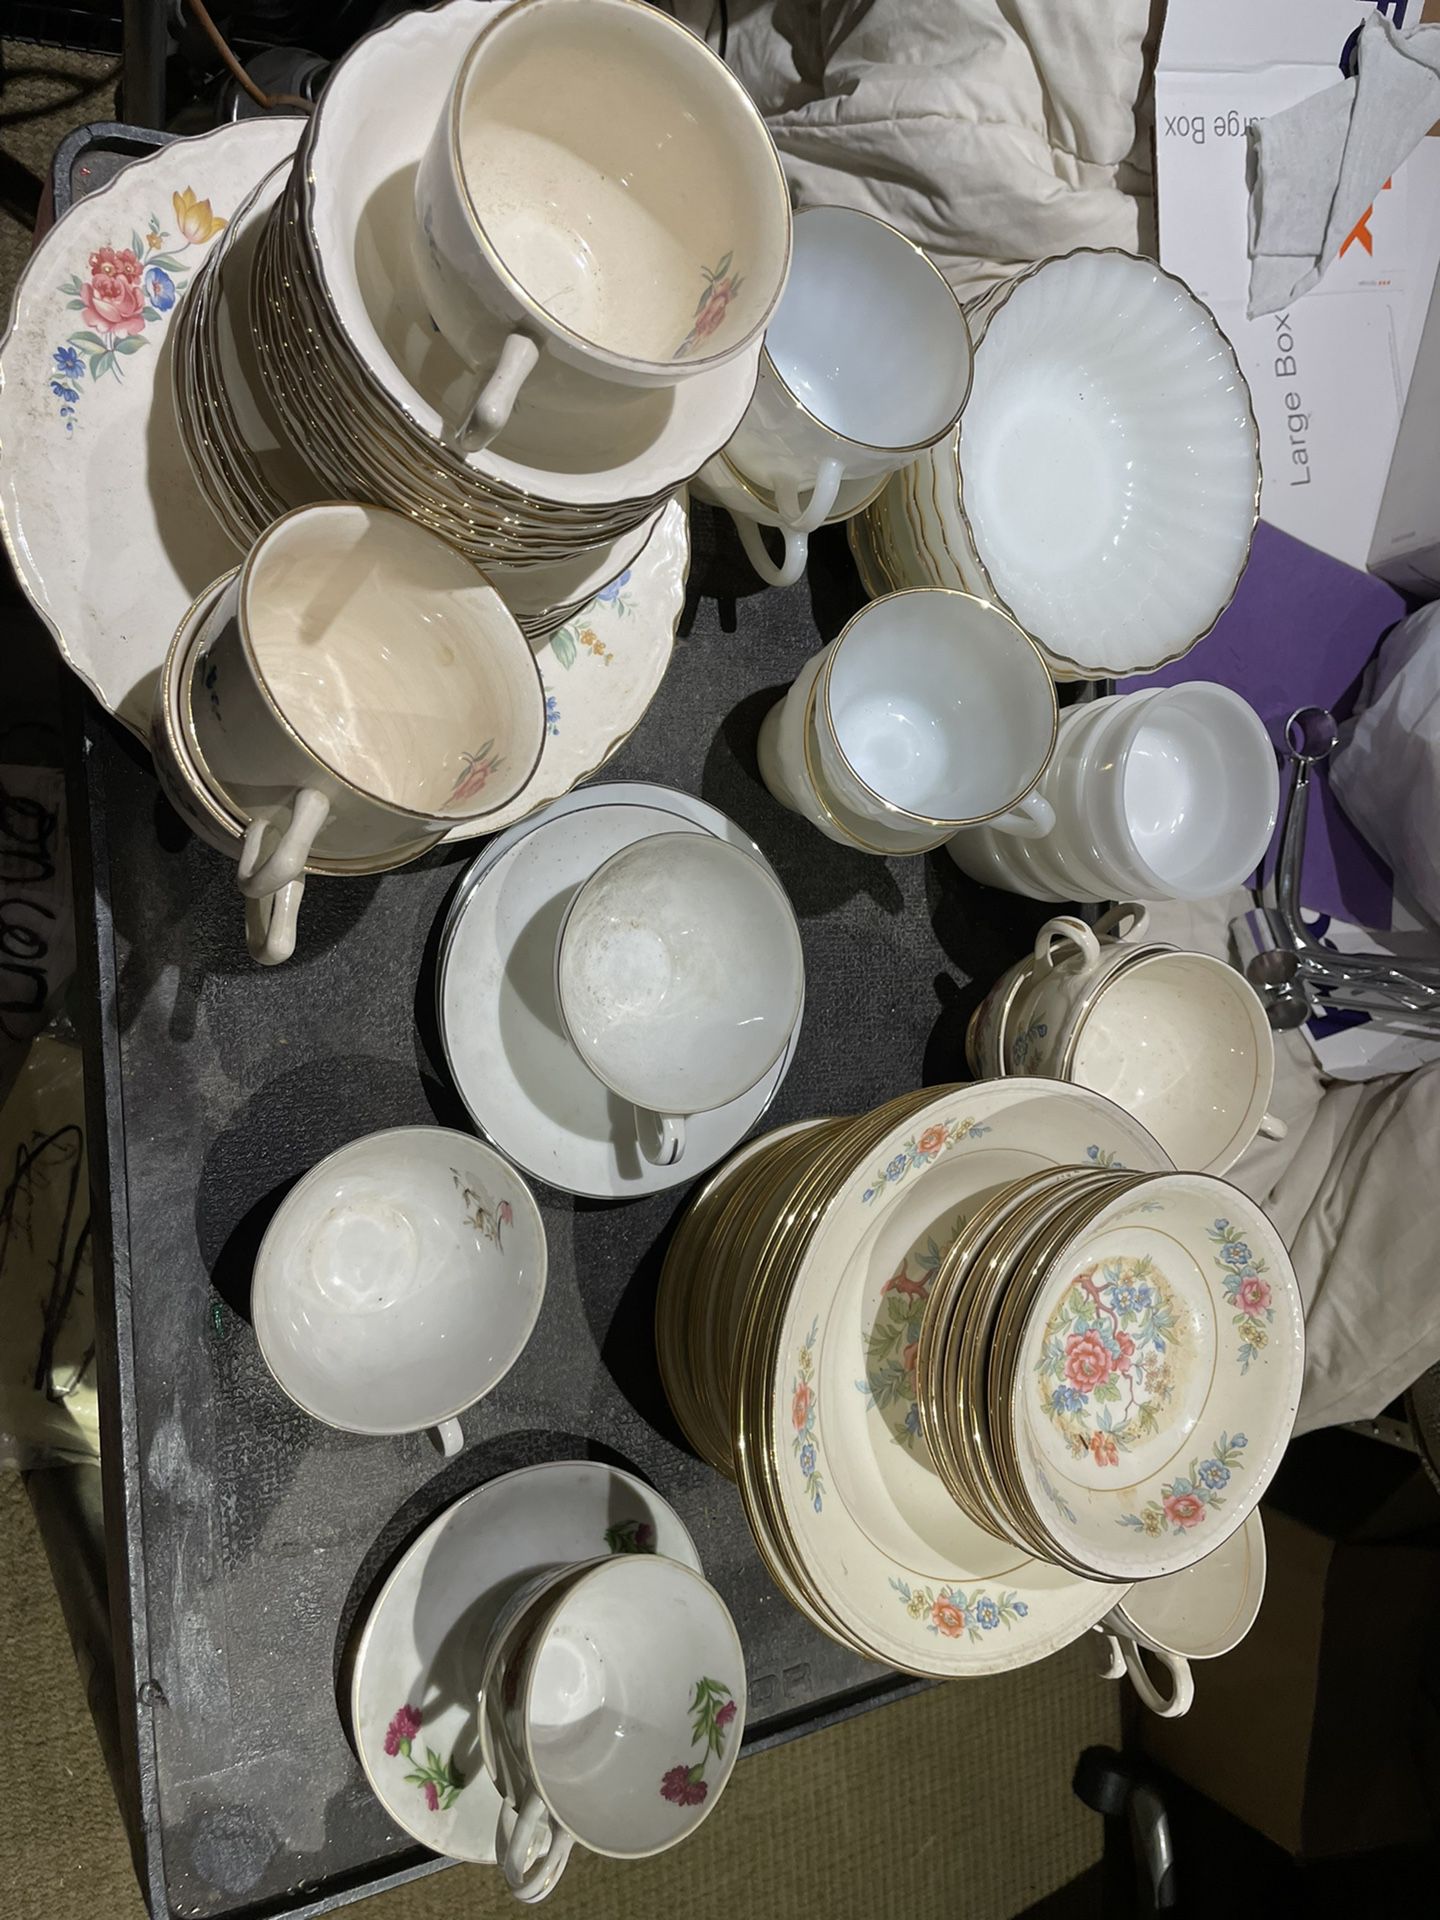 68 Pieces Of China 5 Total Makes/patterns 